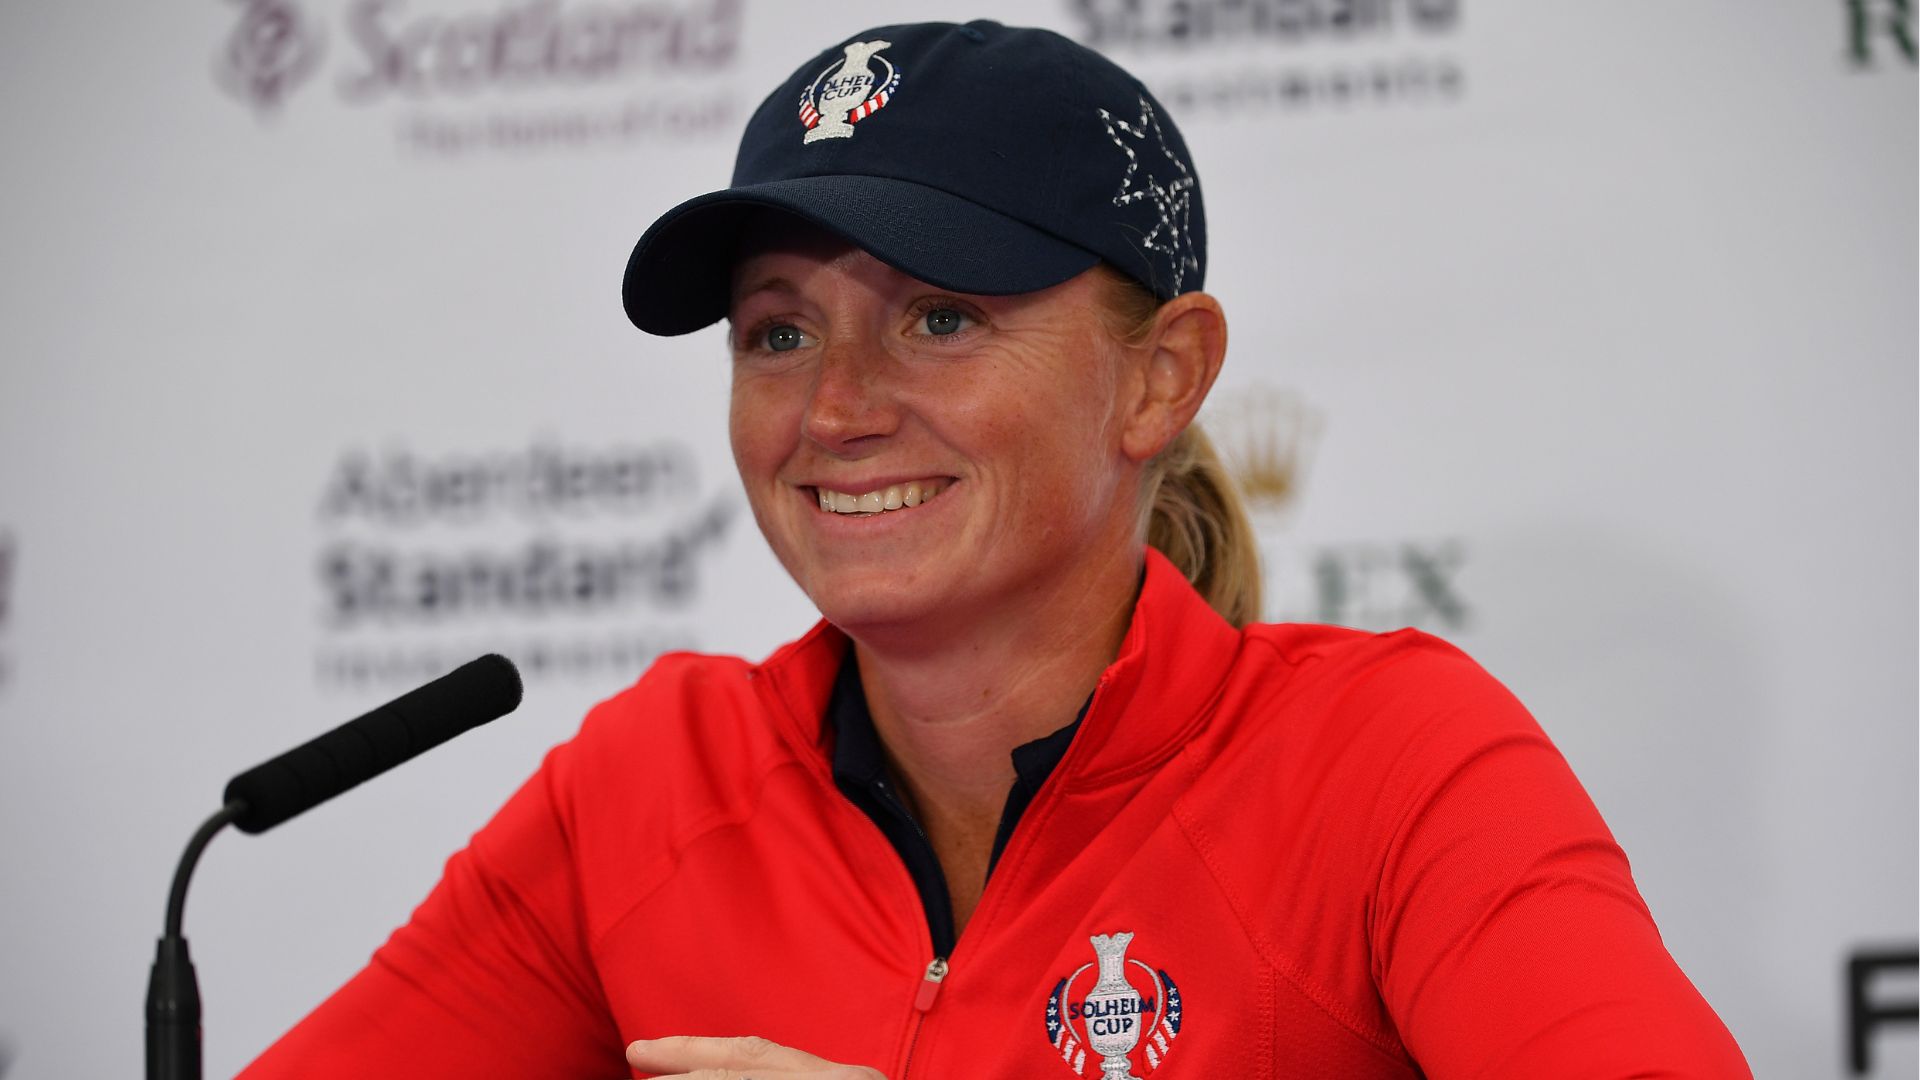 U.S. Solheim Cup captain Stacy Lewis already talking about Rose Zhang making team